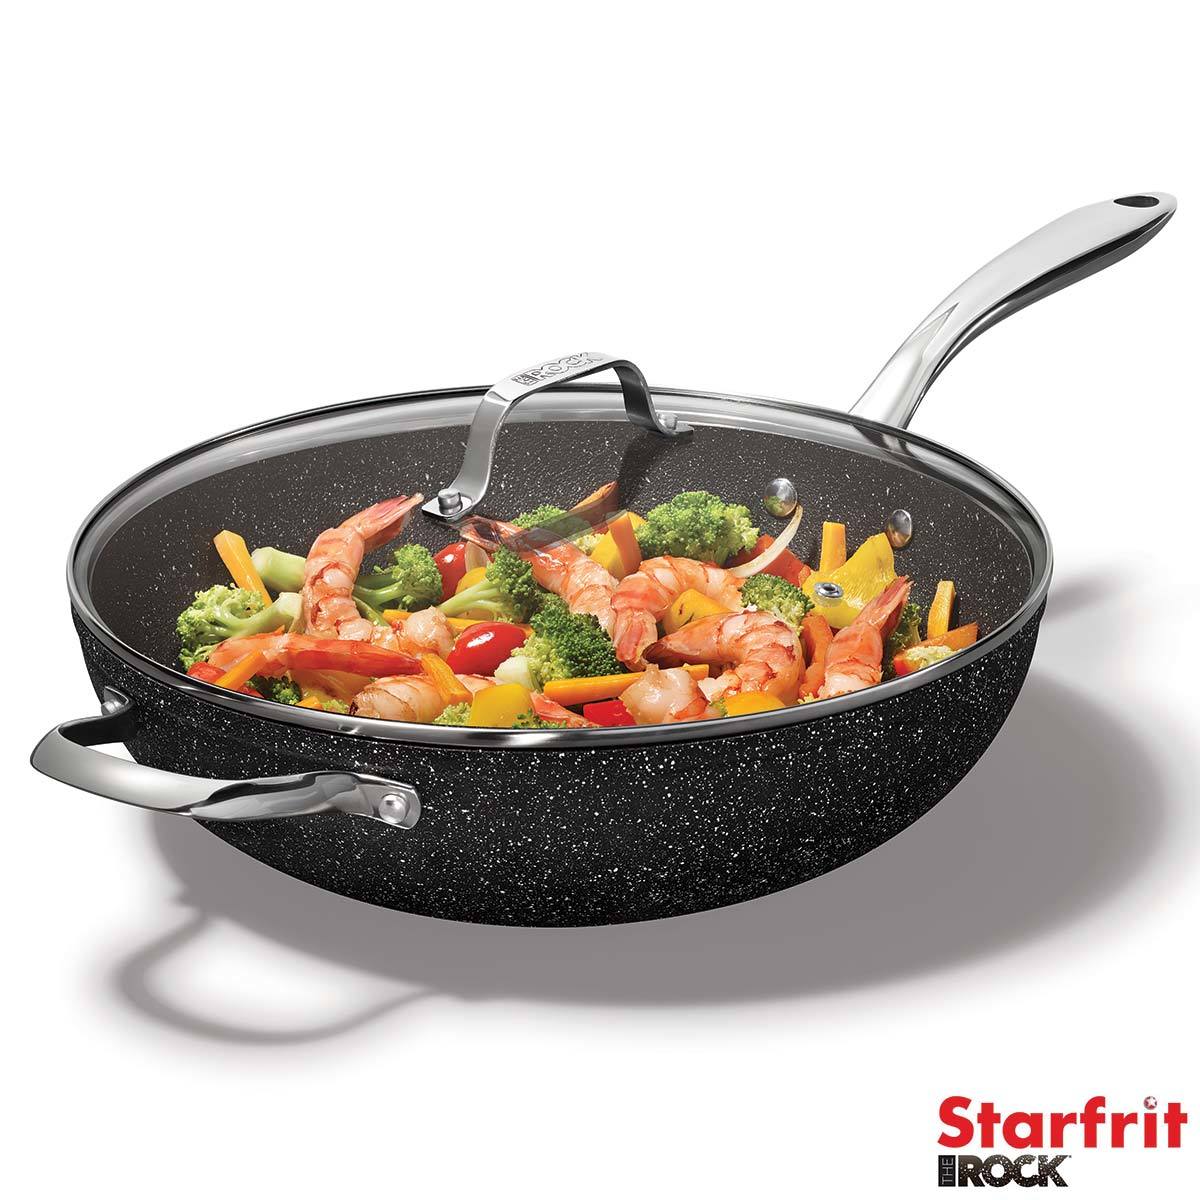 Starfrit The Rock 32cm Wok with Glass Lid